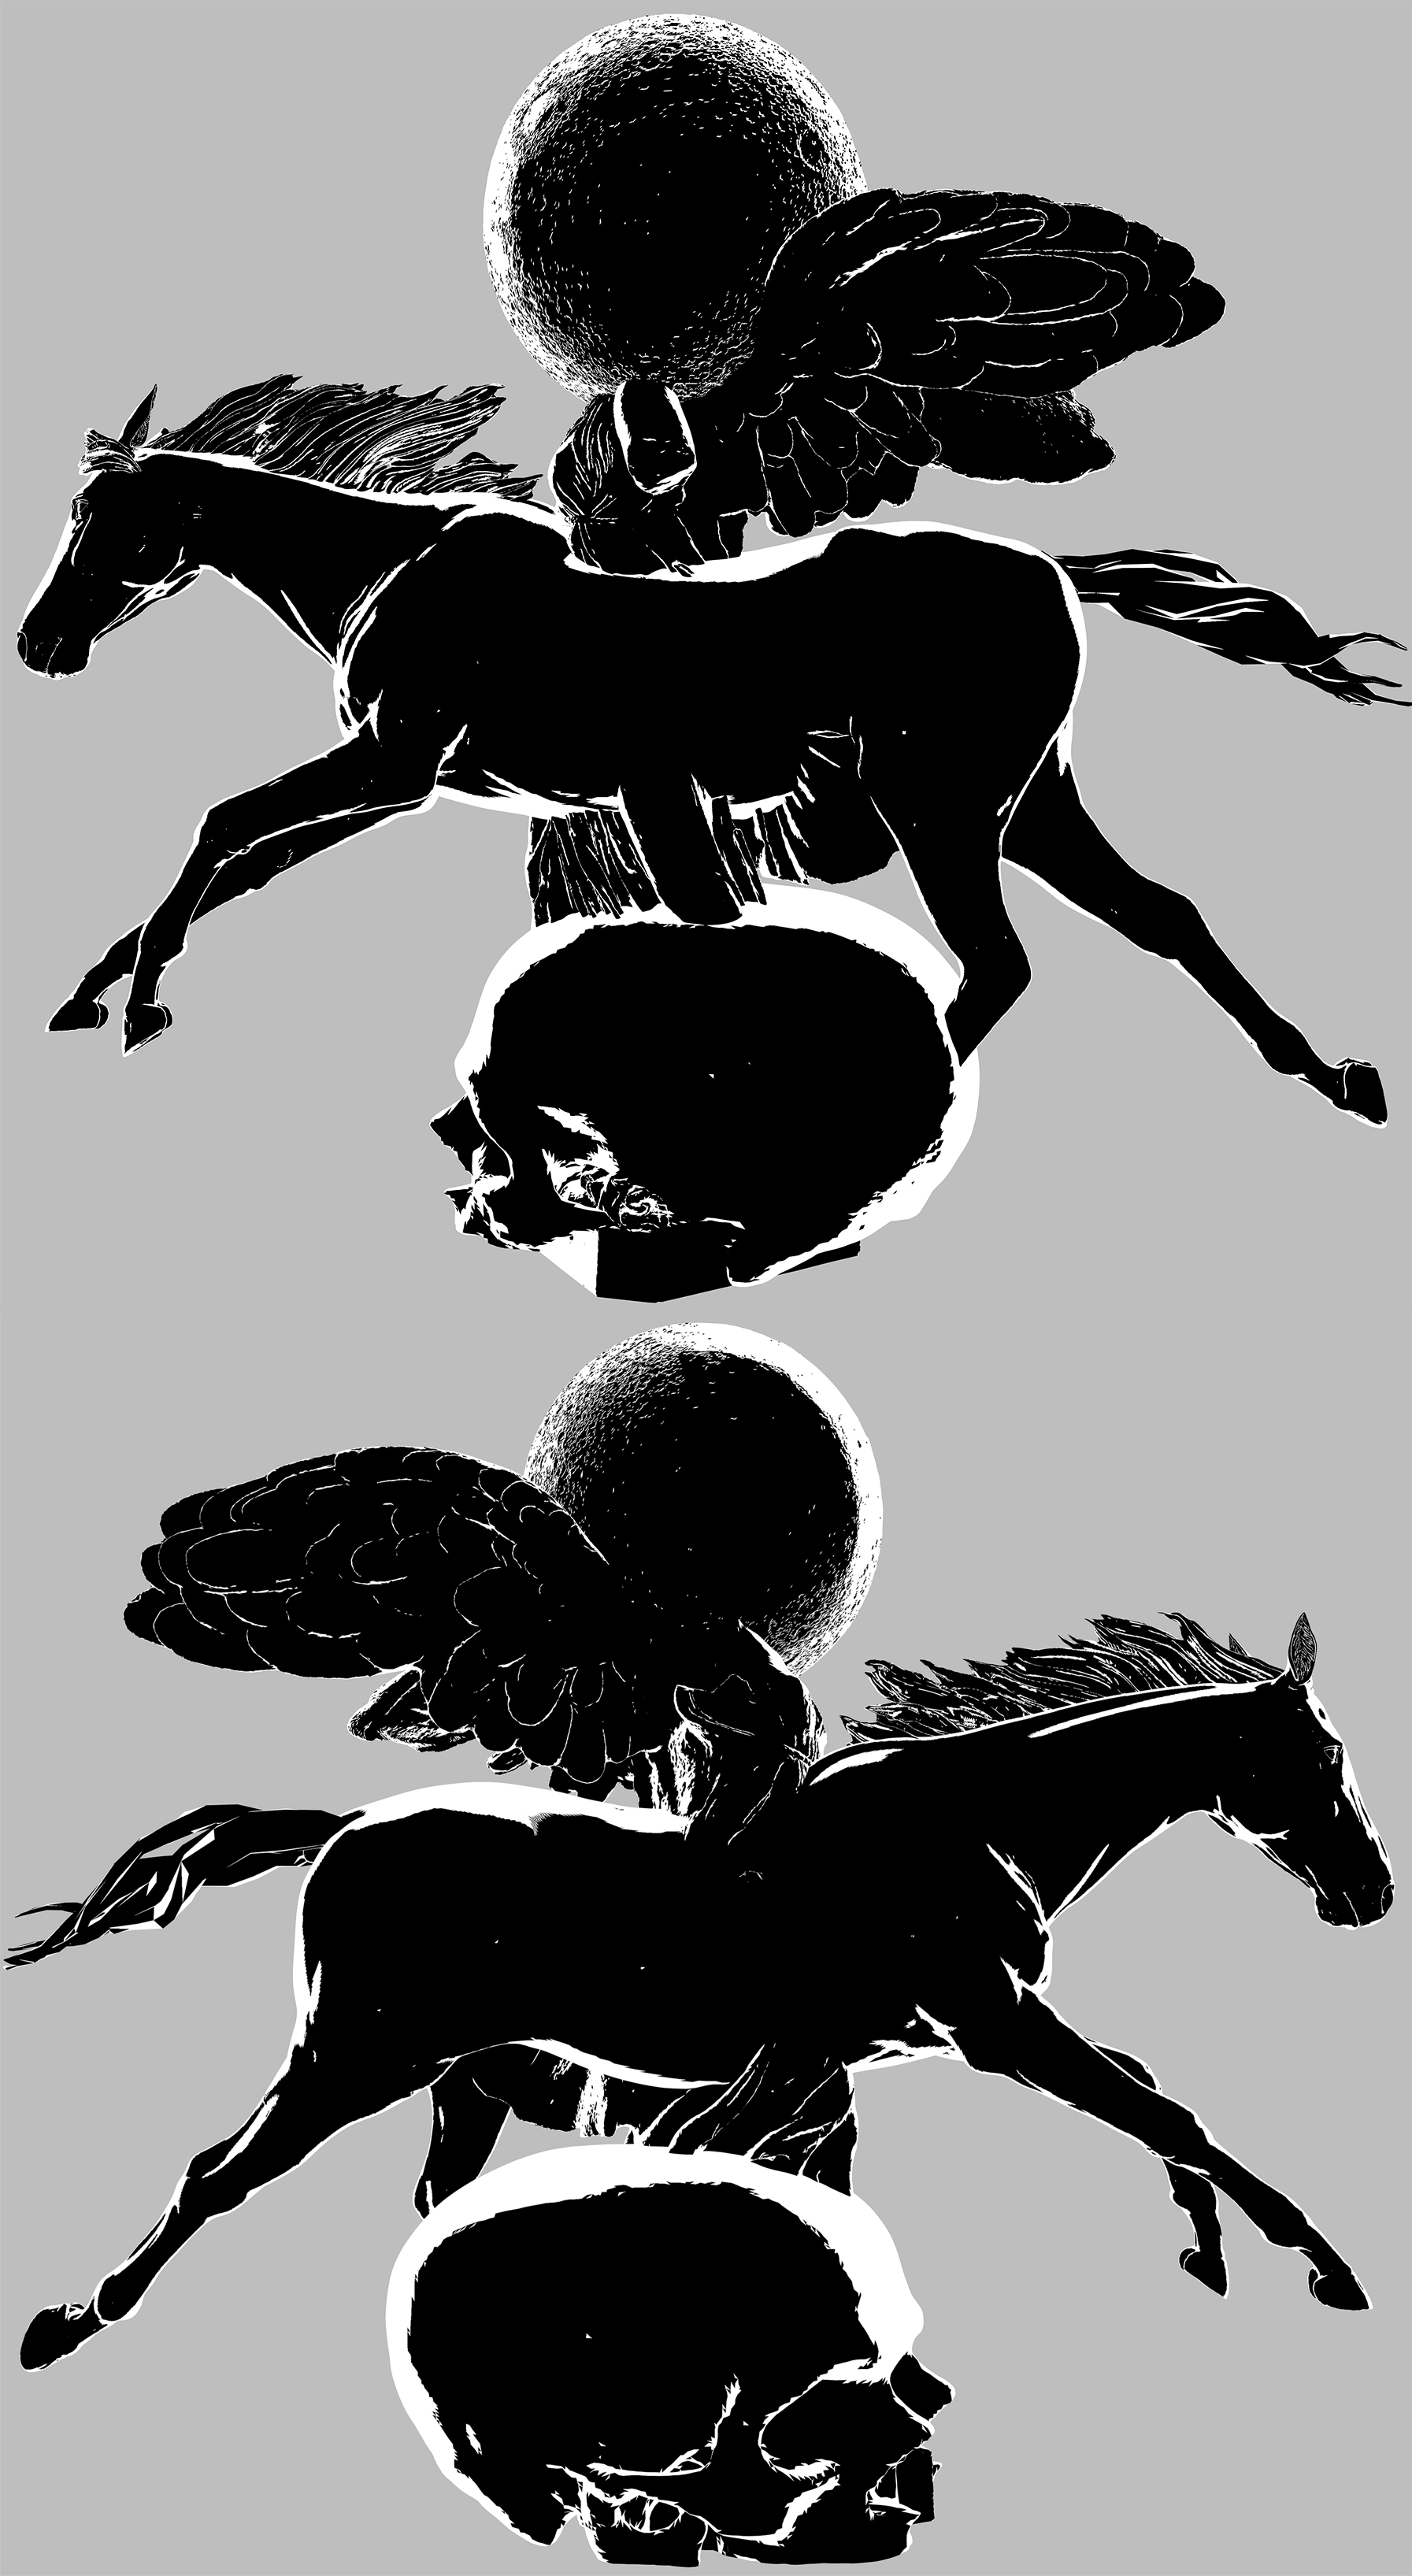 dark pegasus victory in black and white left and right sides